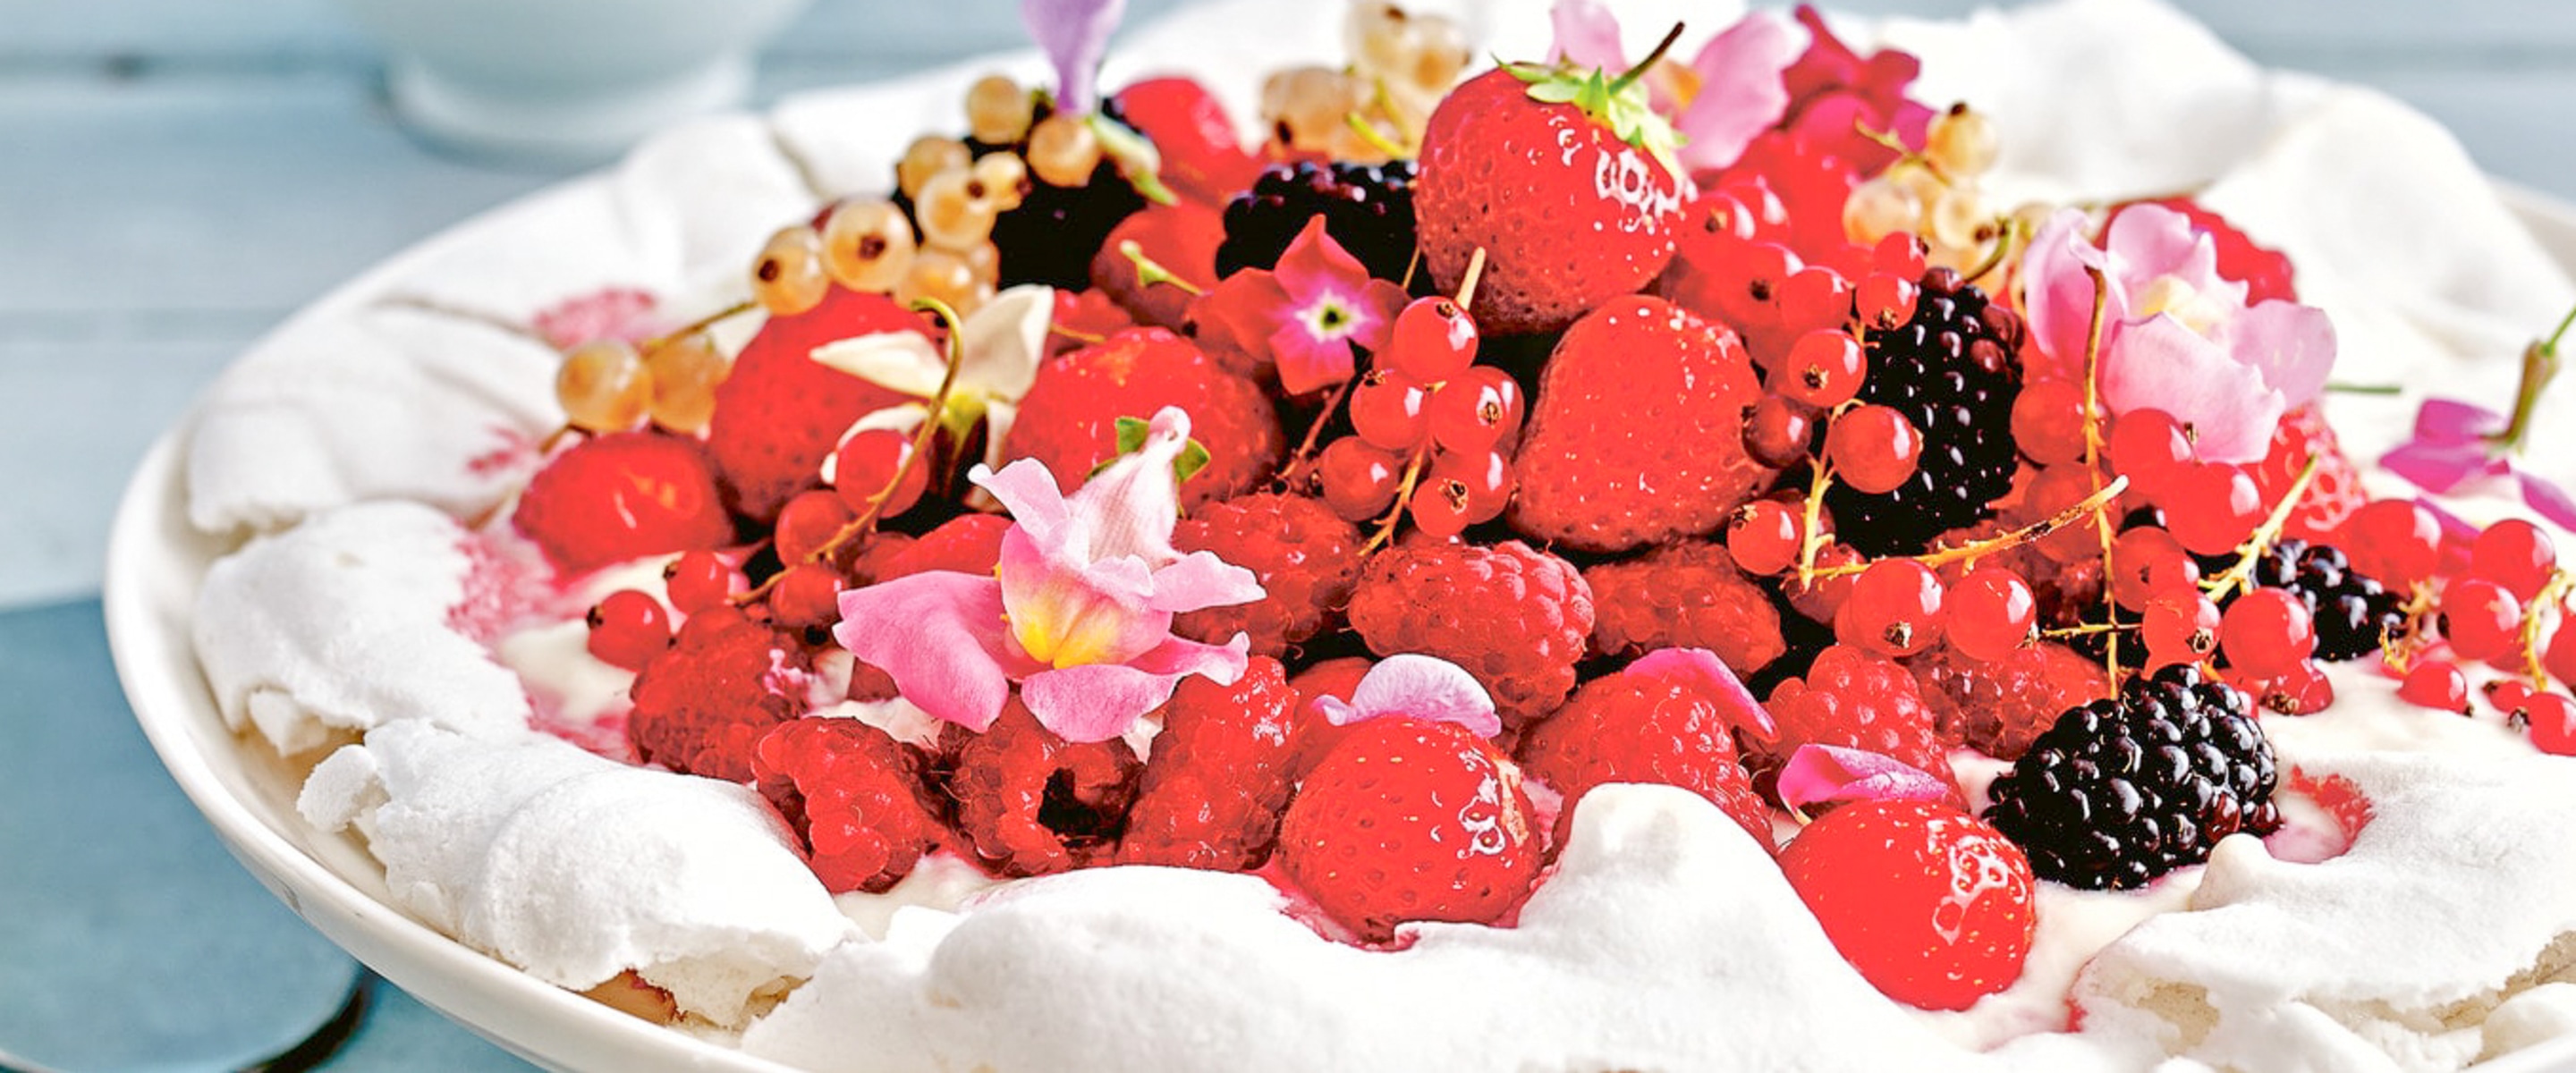 Make Light, Fluffy, Egg-Free Meringues With These Delicious Recipes for Inspiration